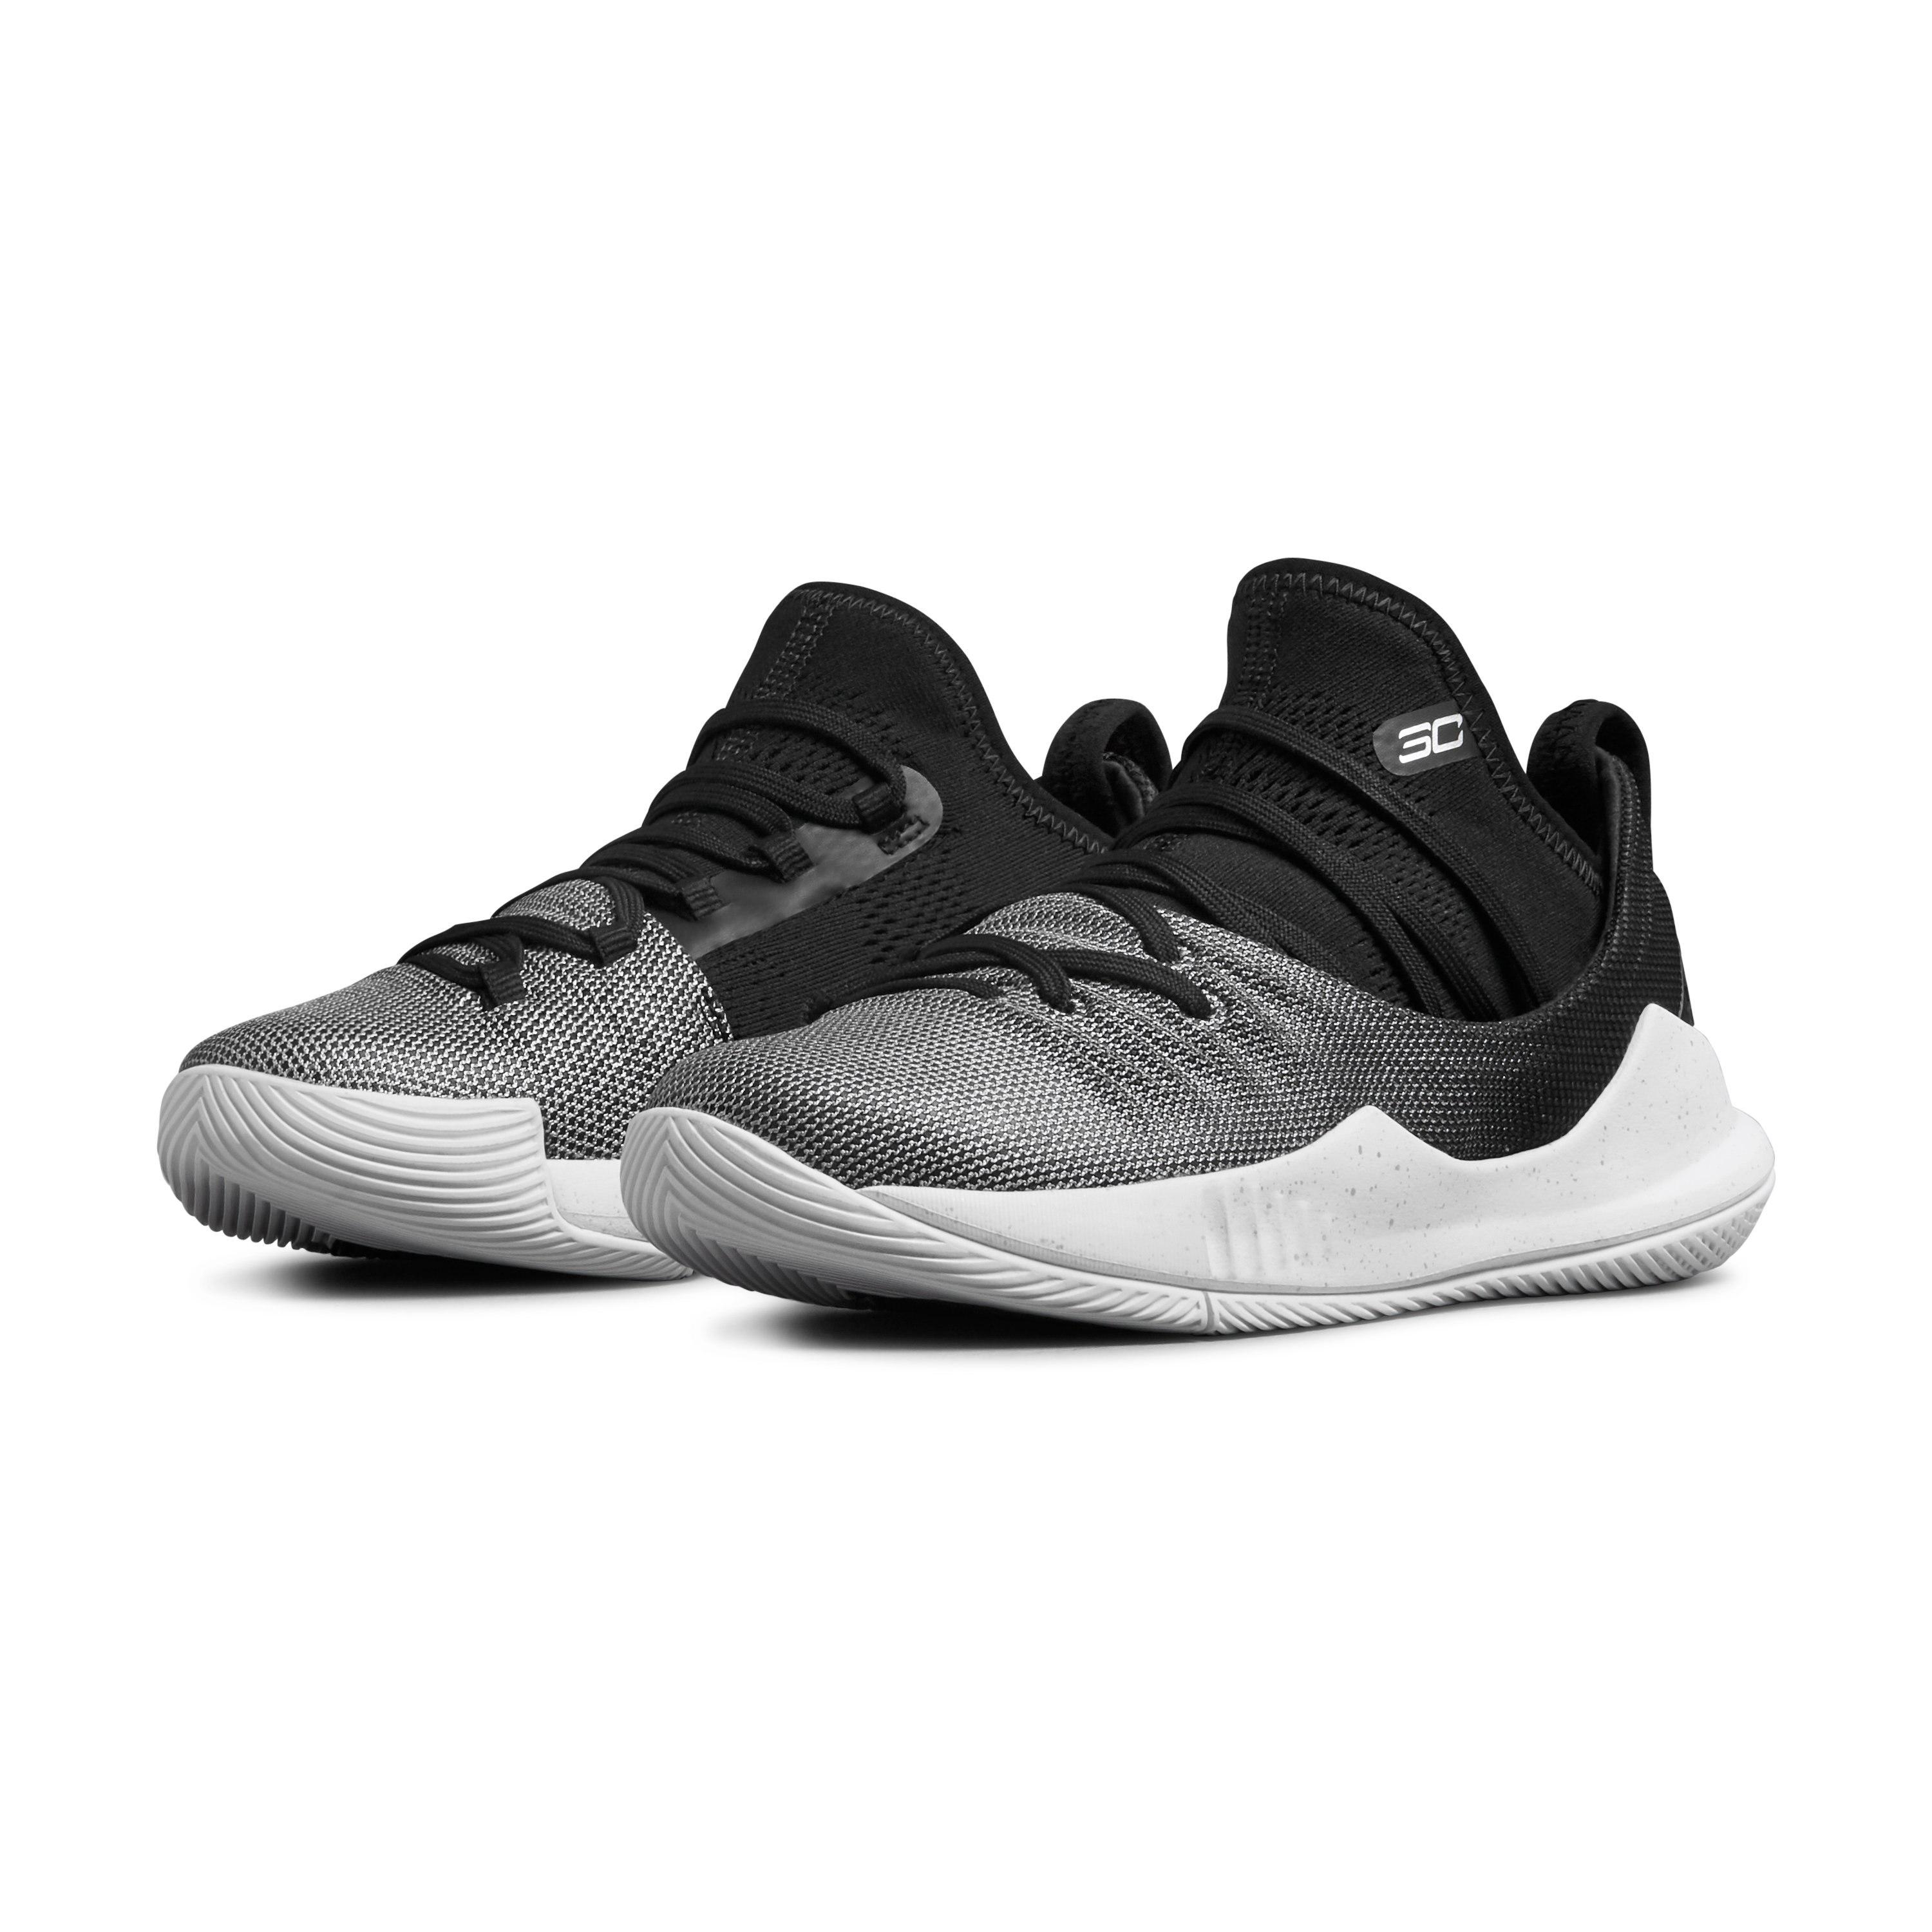 under armour men's curry 5 basketball shoe